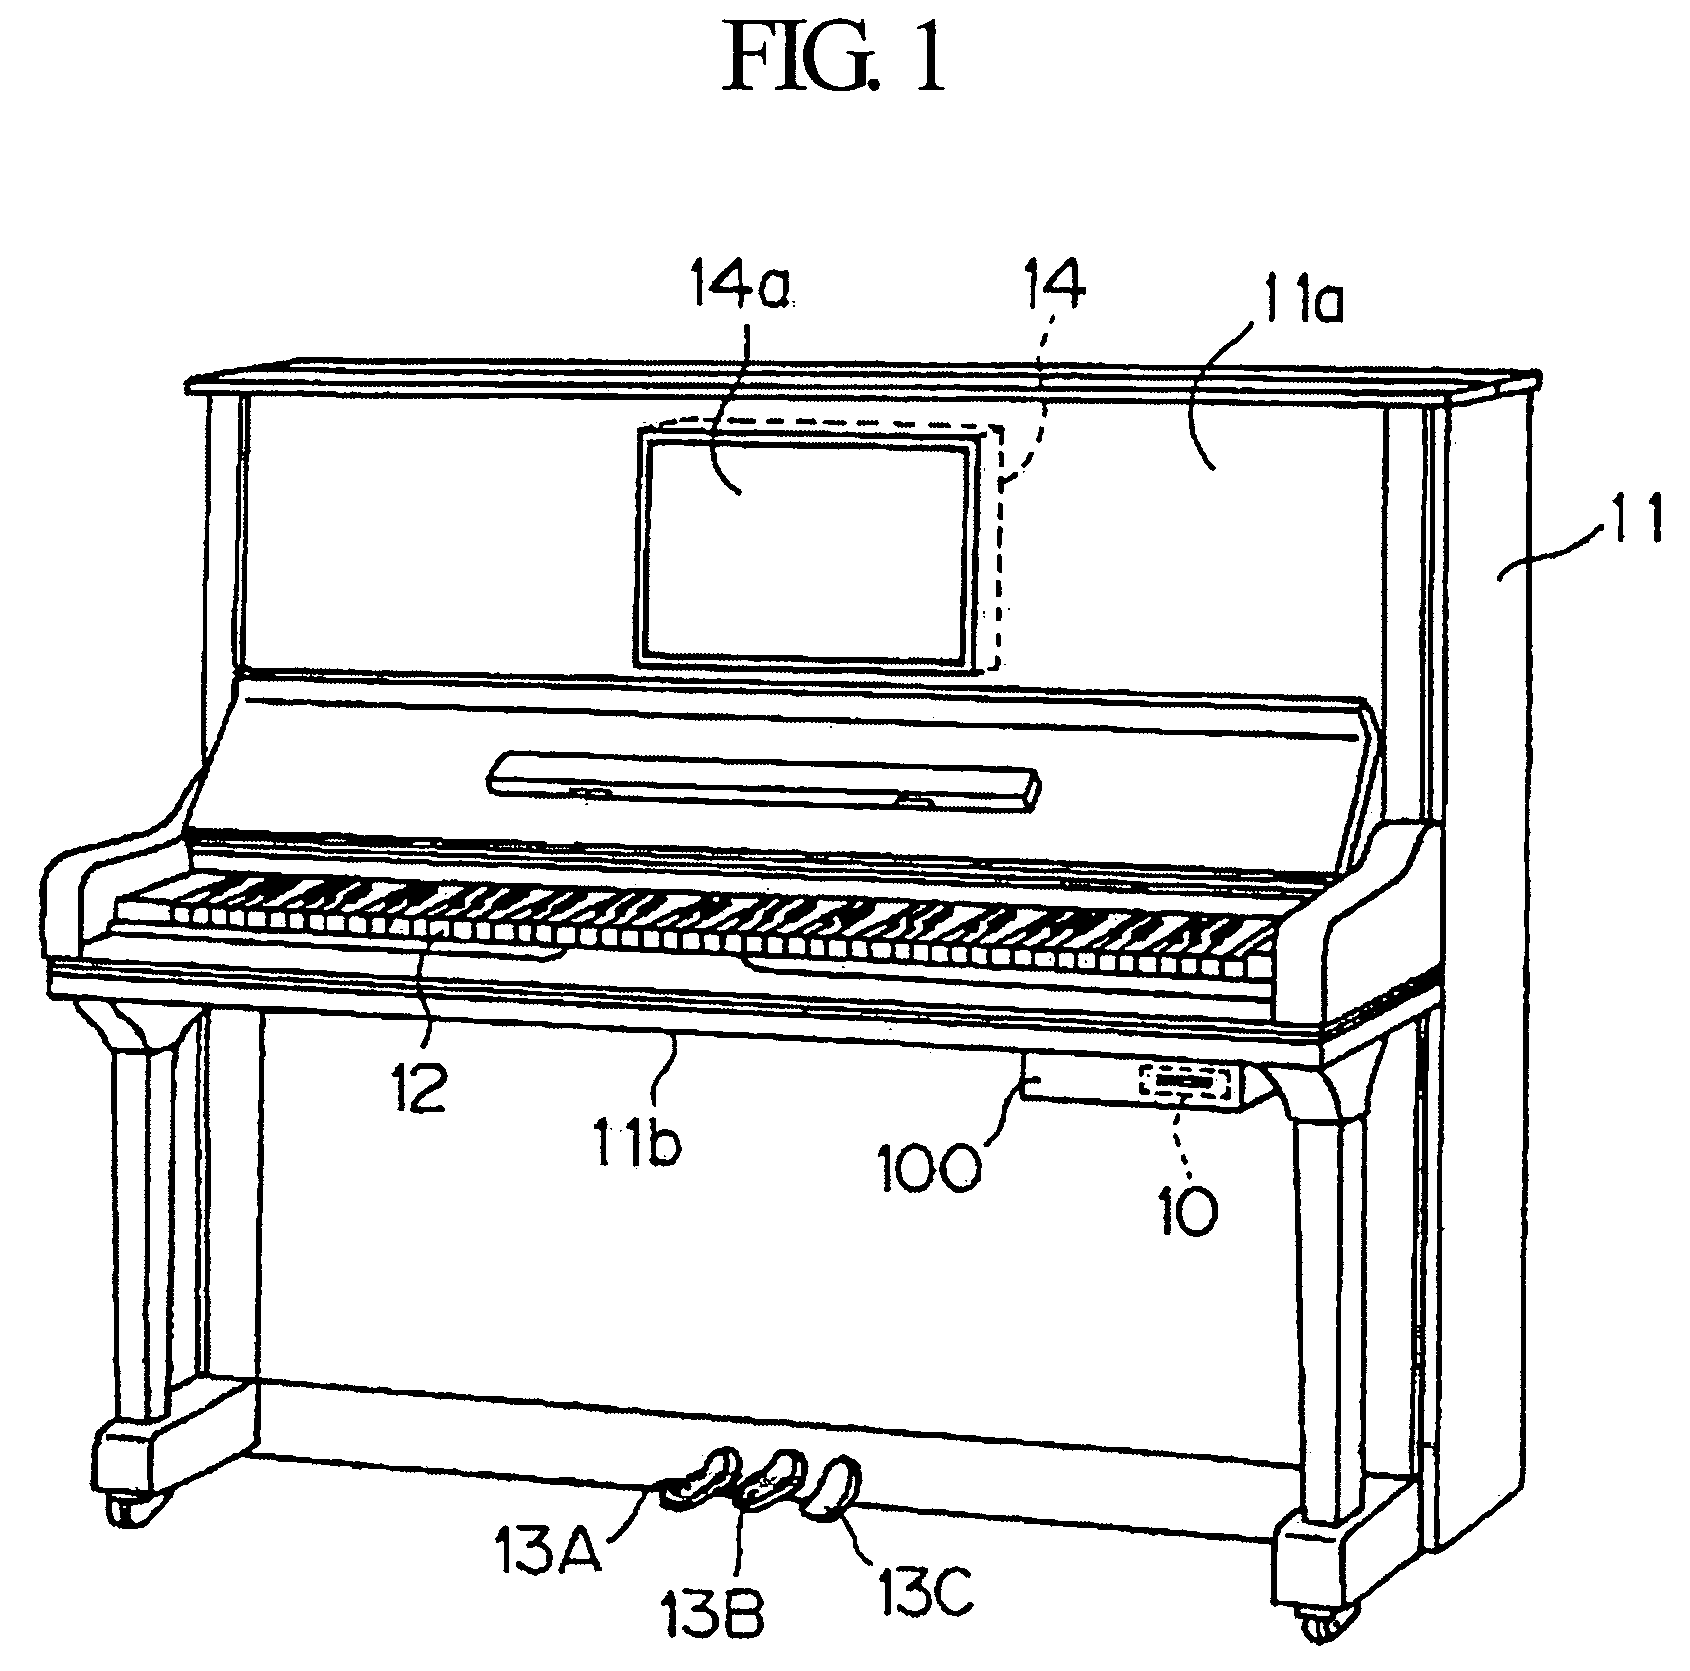 Keyboard musical instrument displaying depression values of pedals and keys